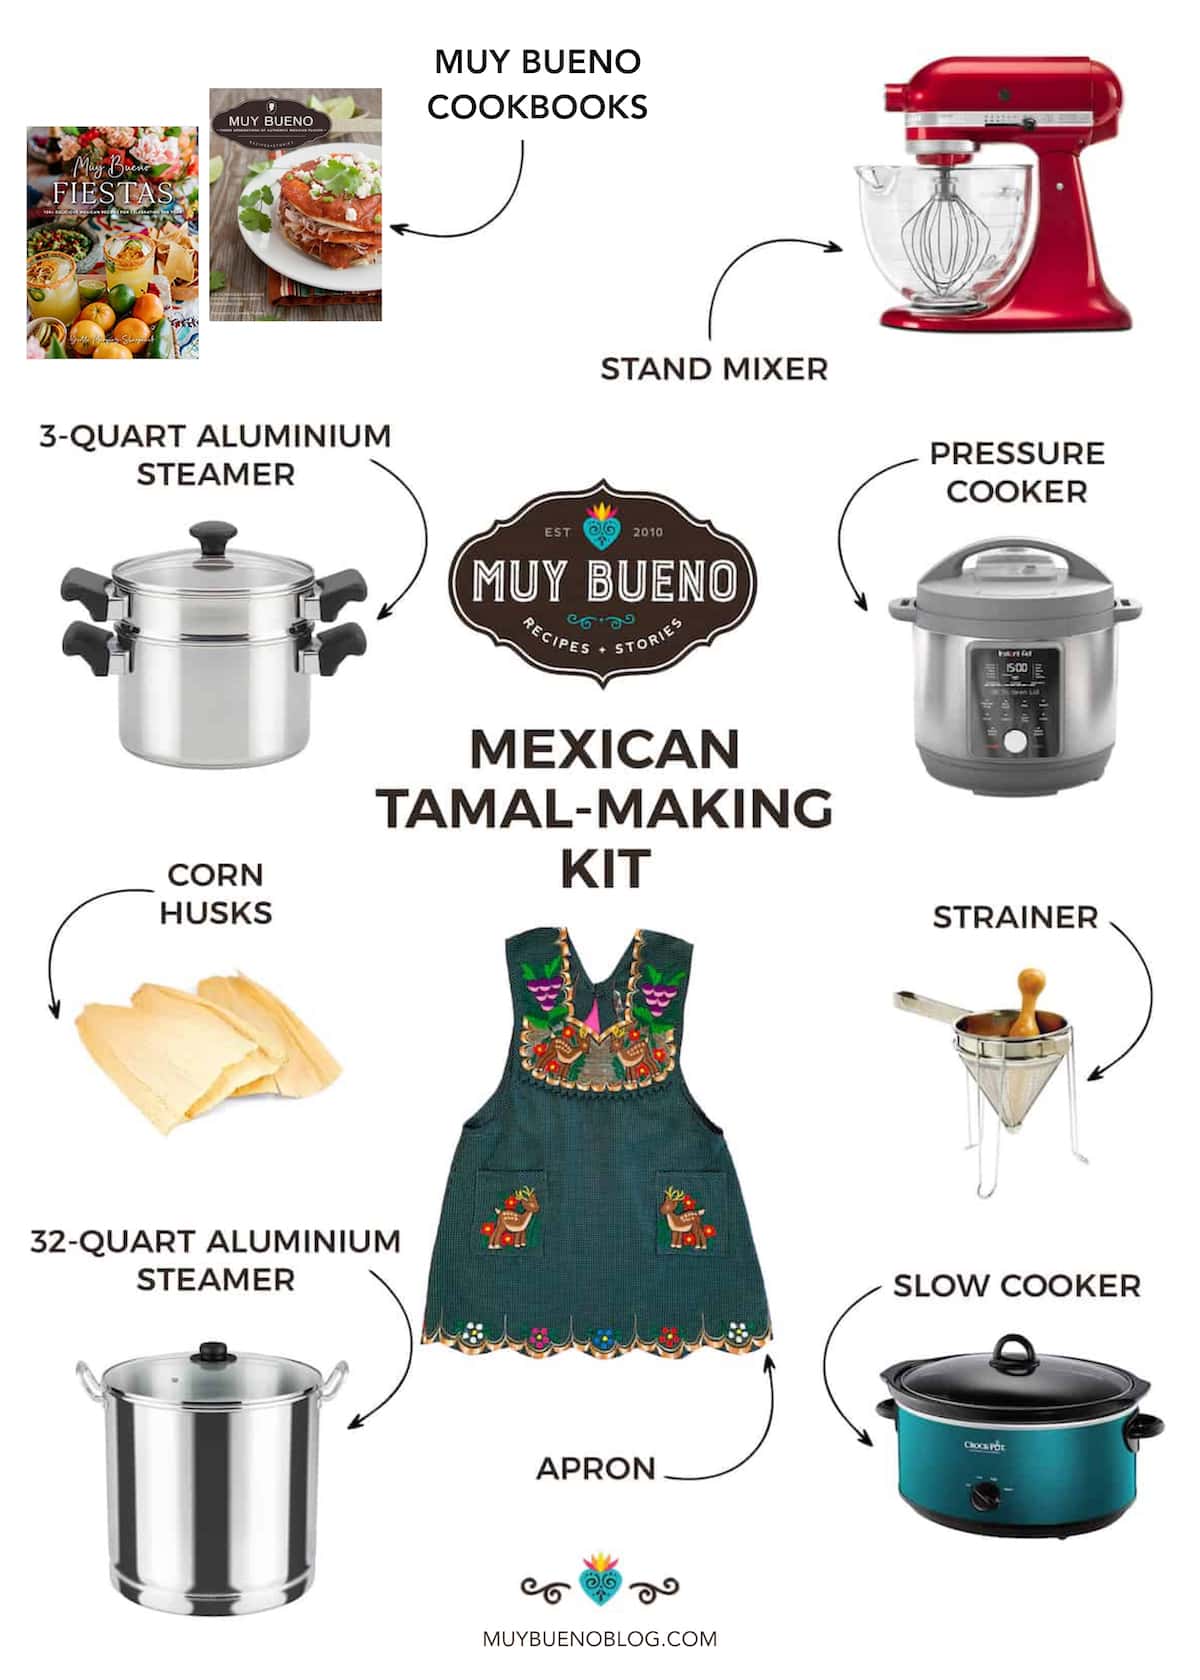 visual gift guide of the different types of equipment you'll need (or can use) to make homemade tamales like the Muy Bueno cookbook, stand mixer, aluminum steamer, pressure cooker, apron and more.